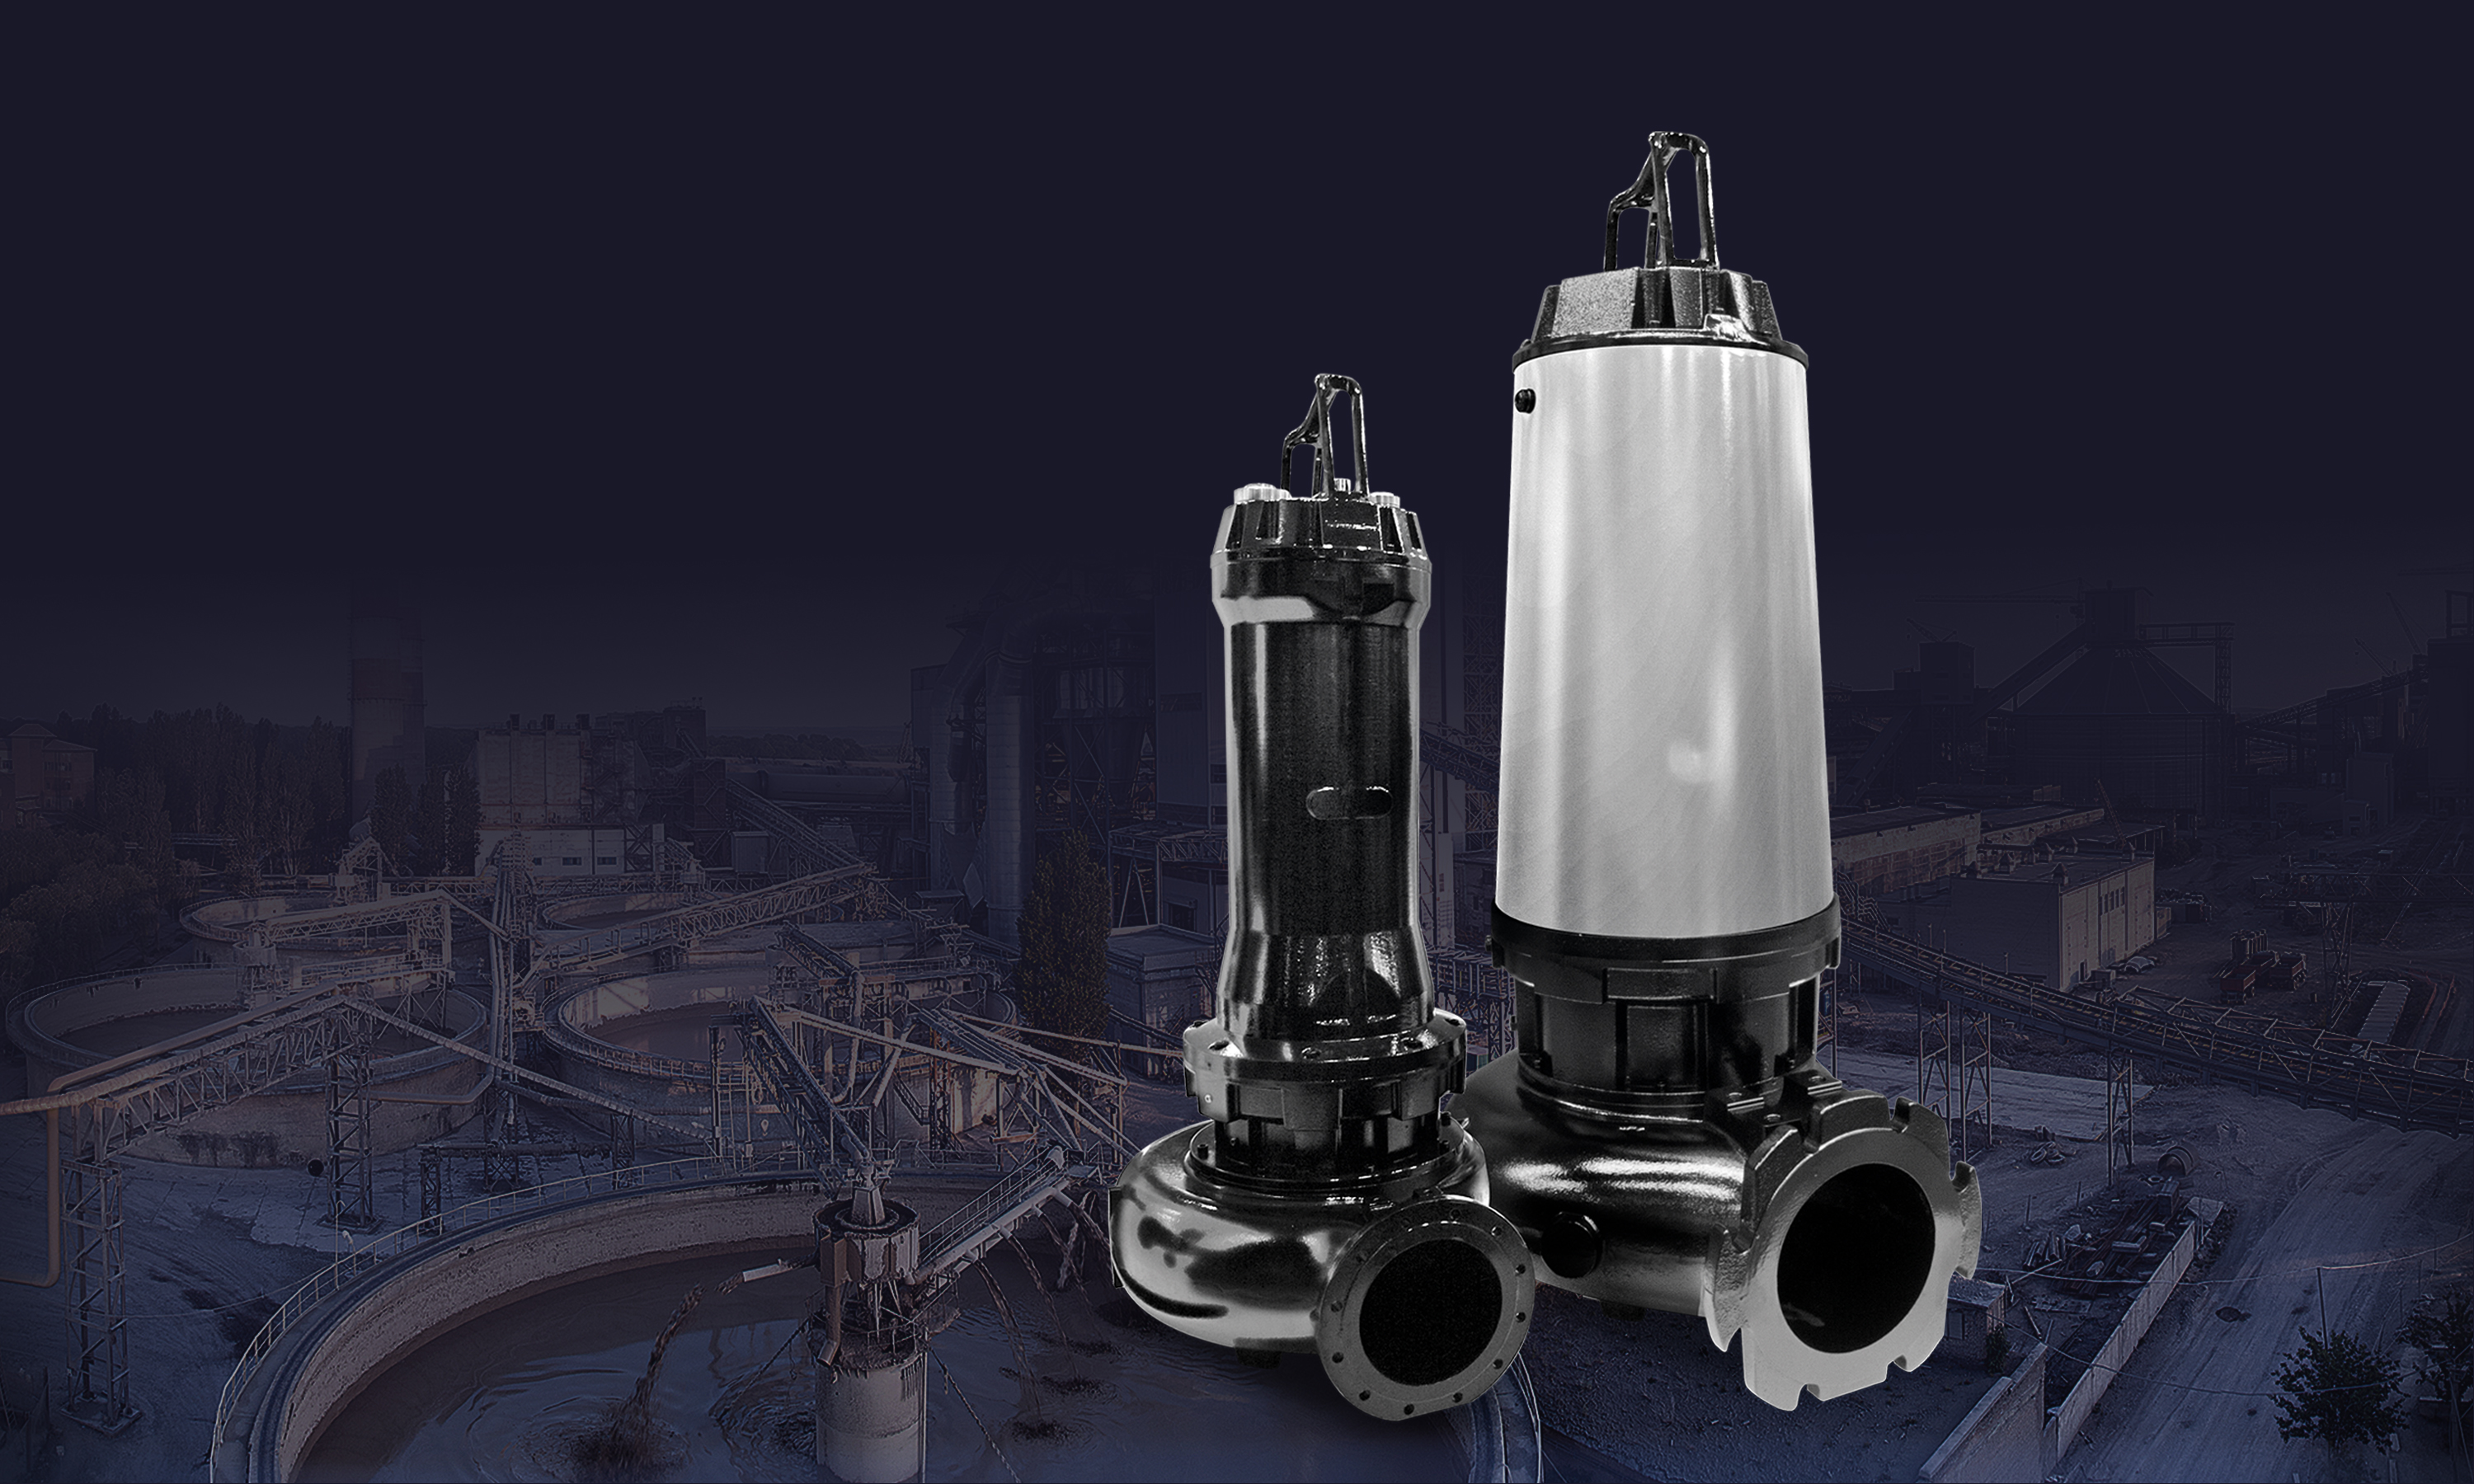 Tsurumi will showcase its new line of submersible, explosion-proof pumps, the AVANT Series.